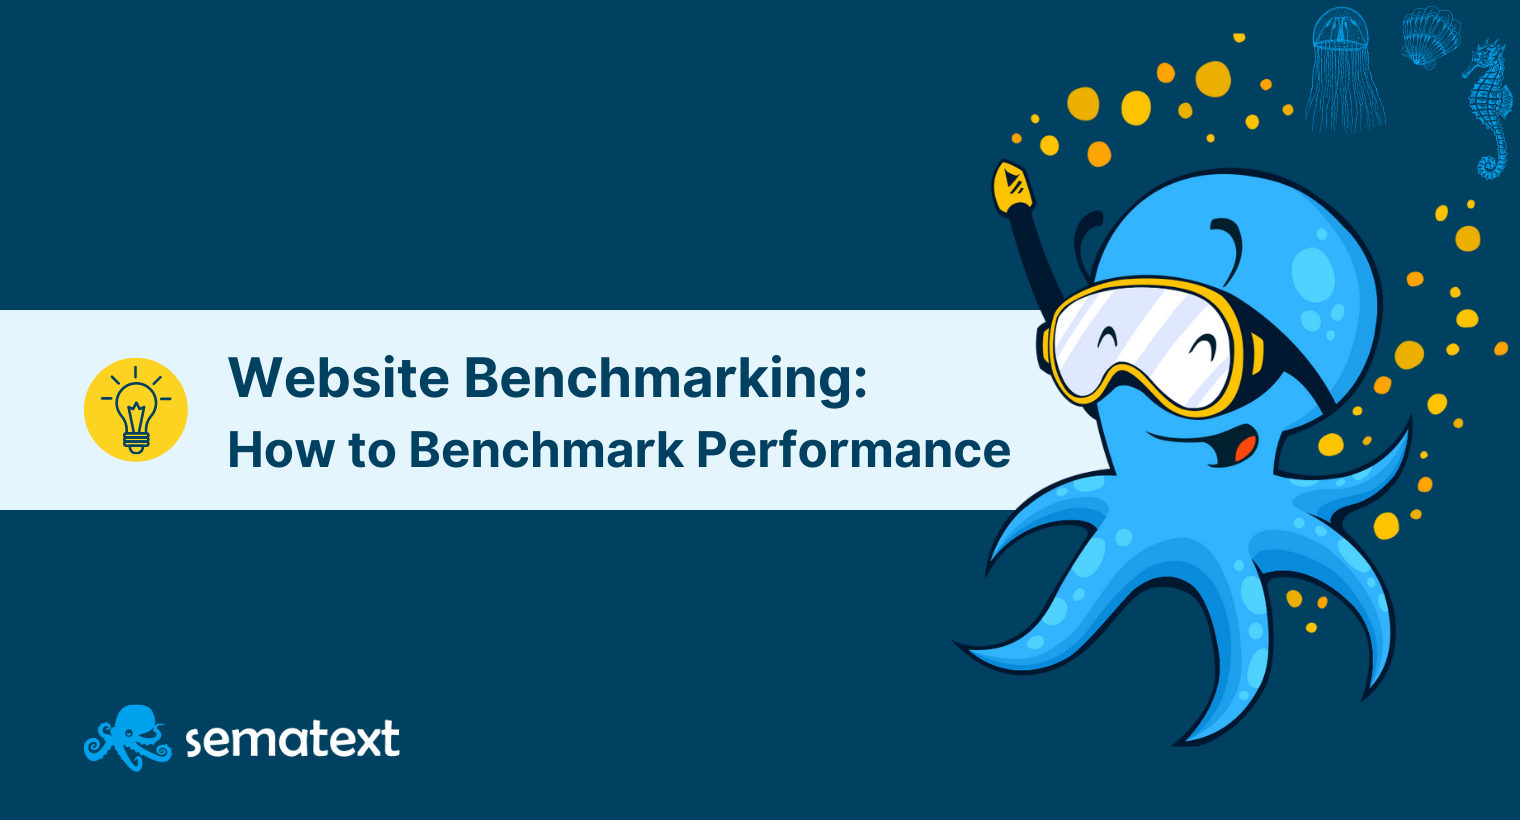 Website Benchmarking: An Example on How to Benchmark Performance Against Competitors